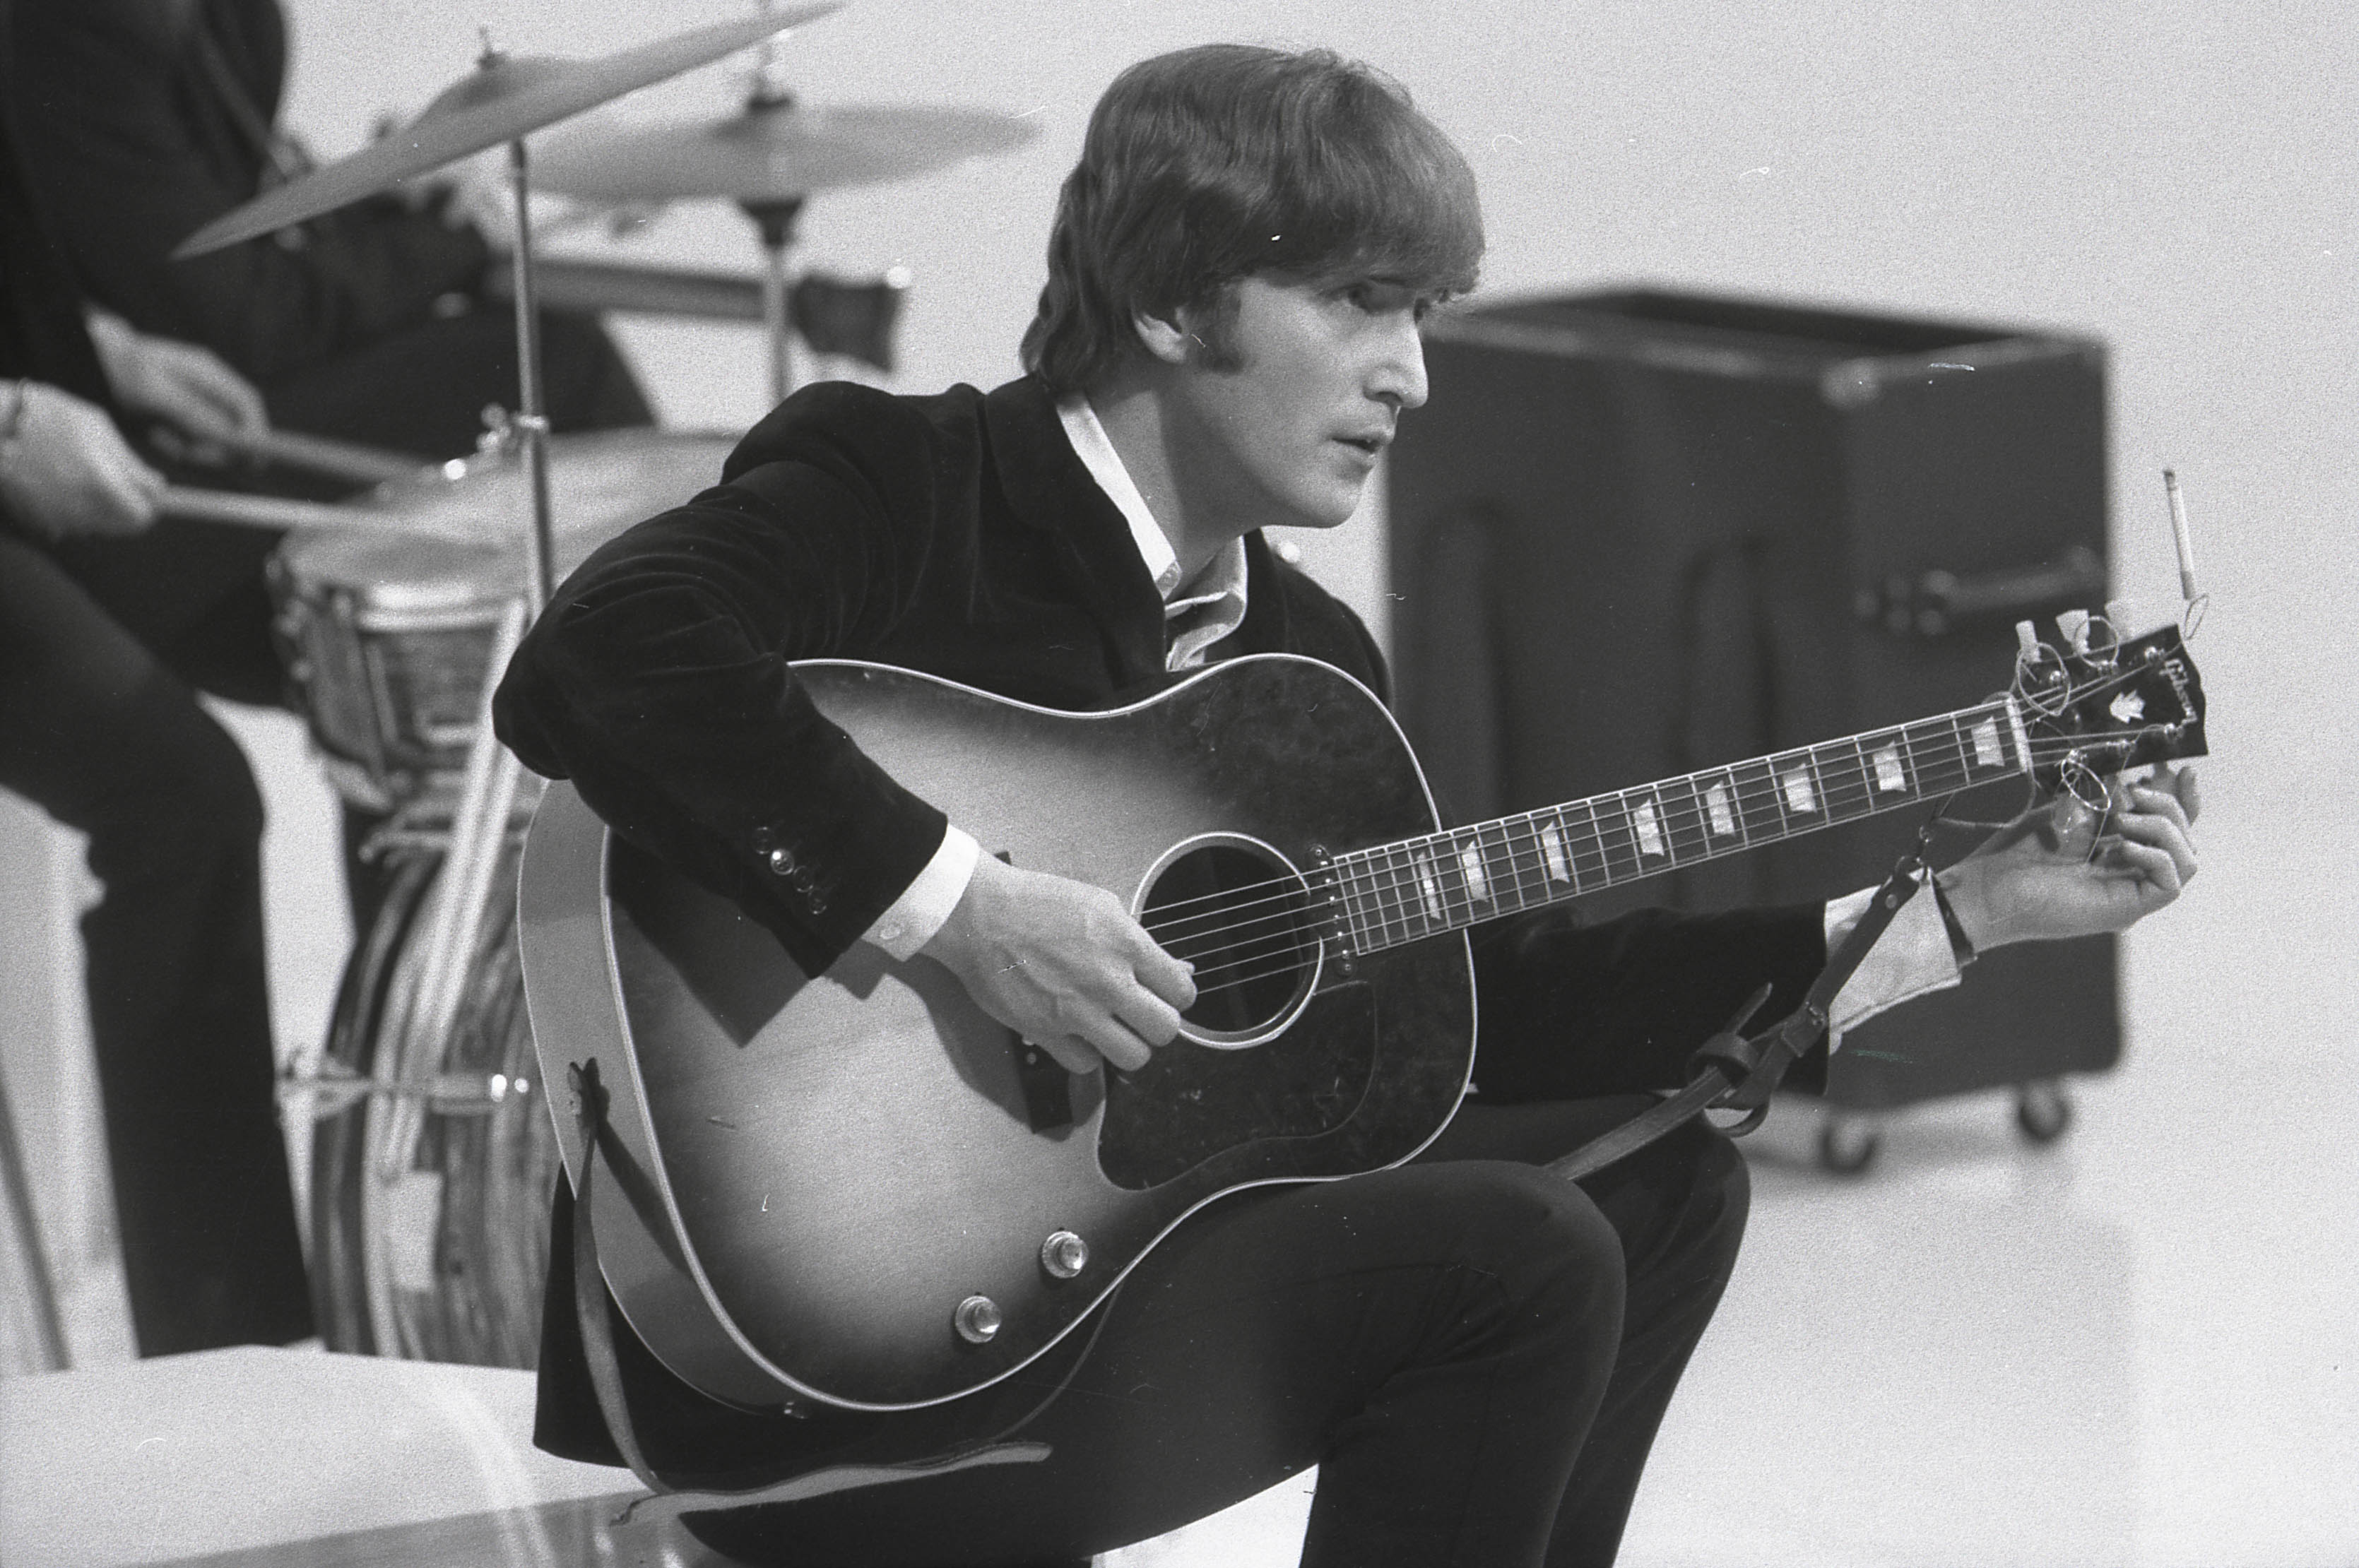 John Lennon of the Beatles with his guitar